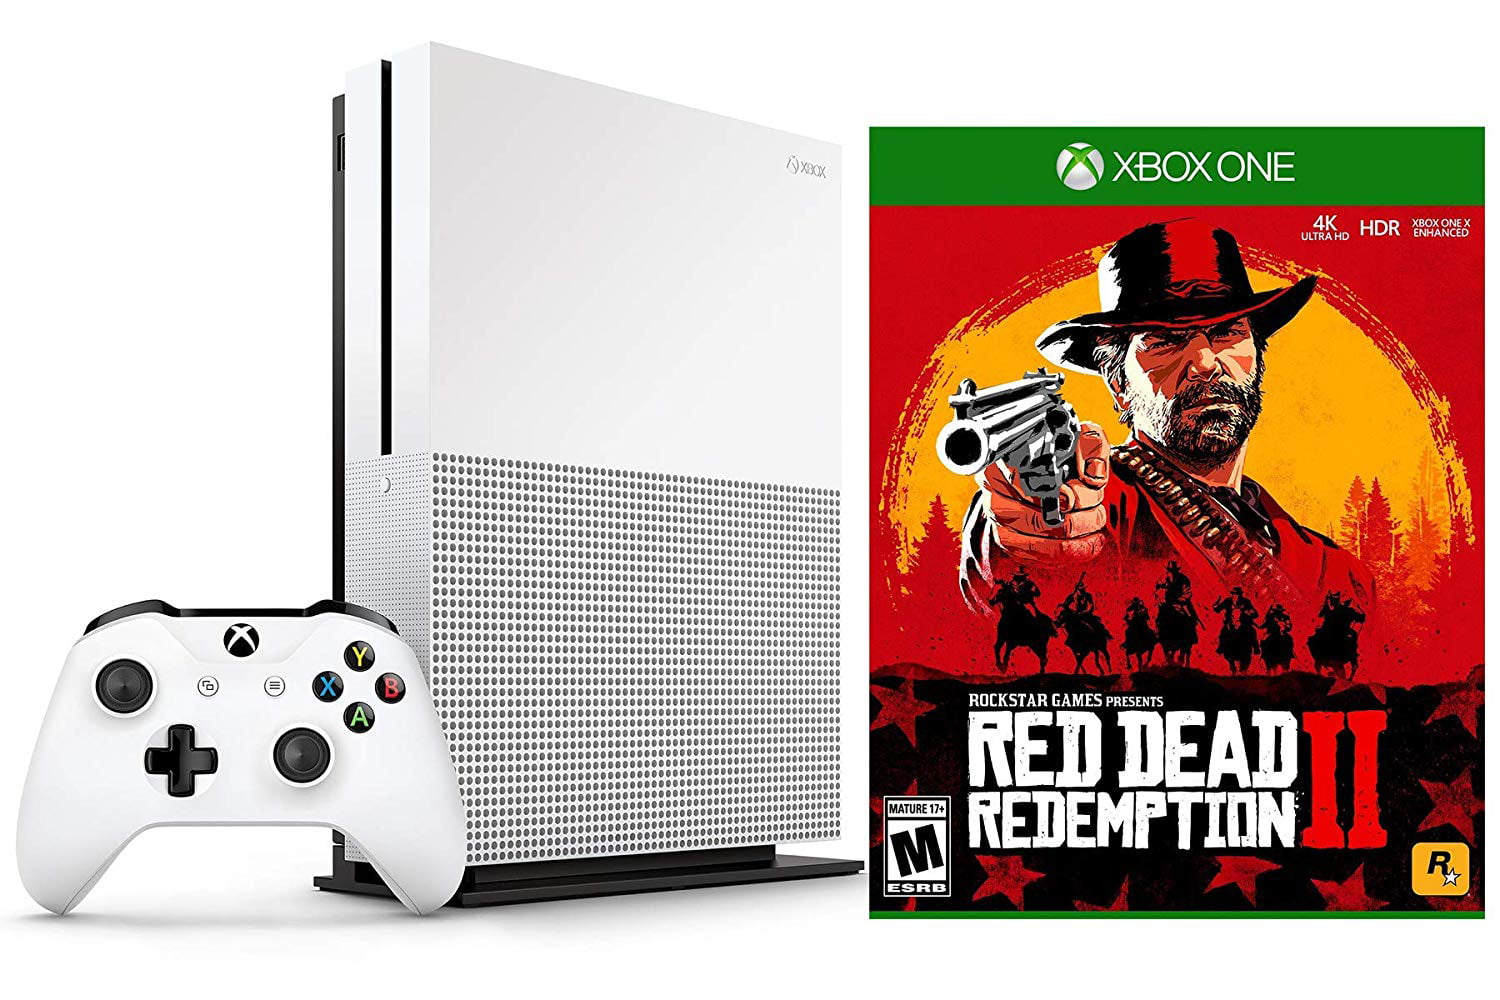 Microsoft Xbox One S Red Dead Redemption 2 Bundle: Xbox S 1TB 4K Entertainment Console with Red Dead Redemption 2 - Walmart.com